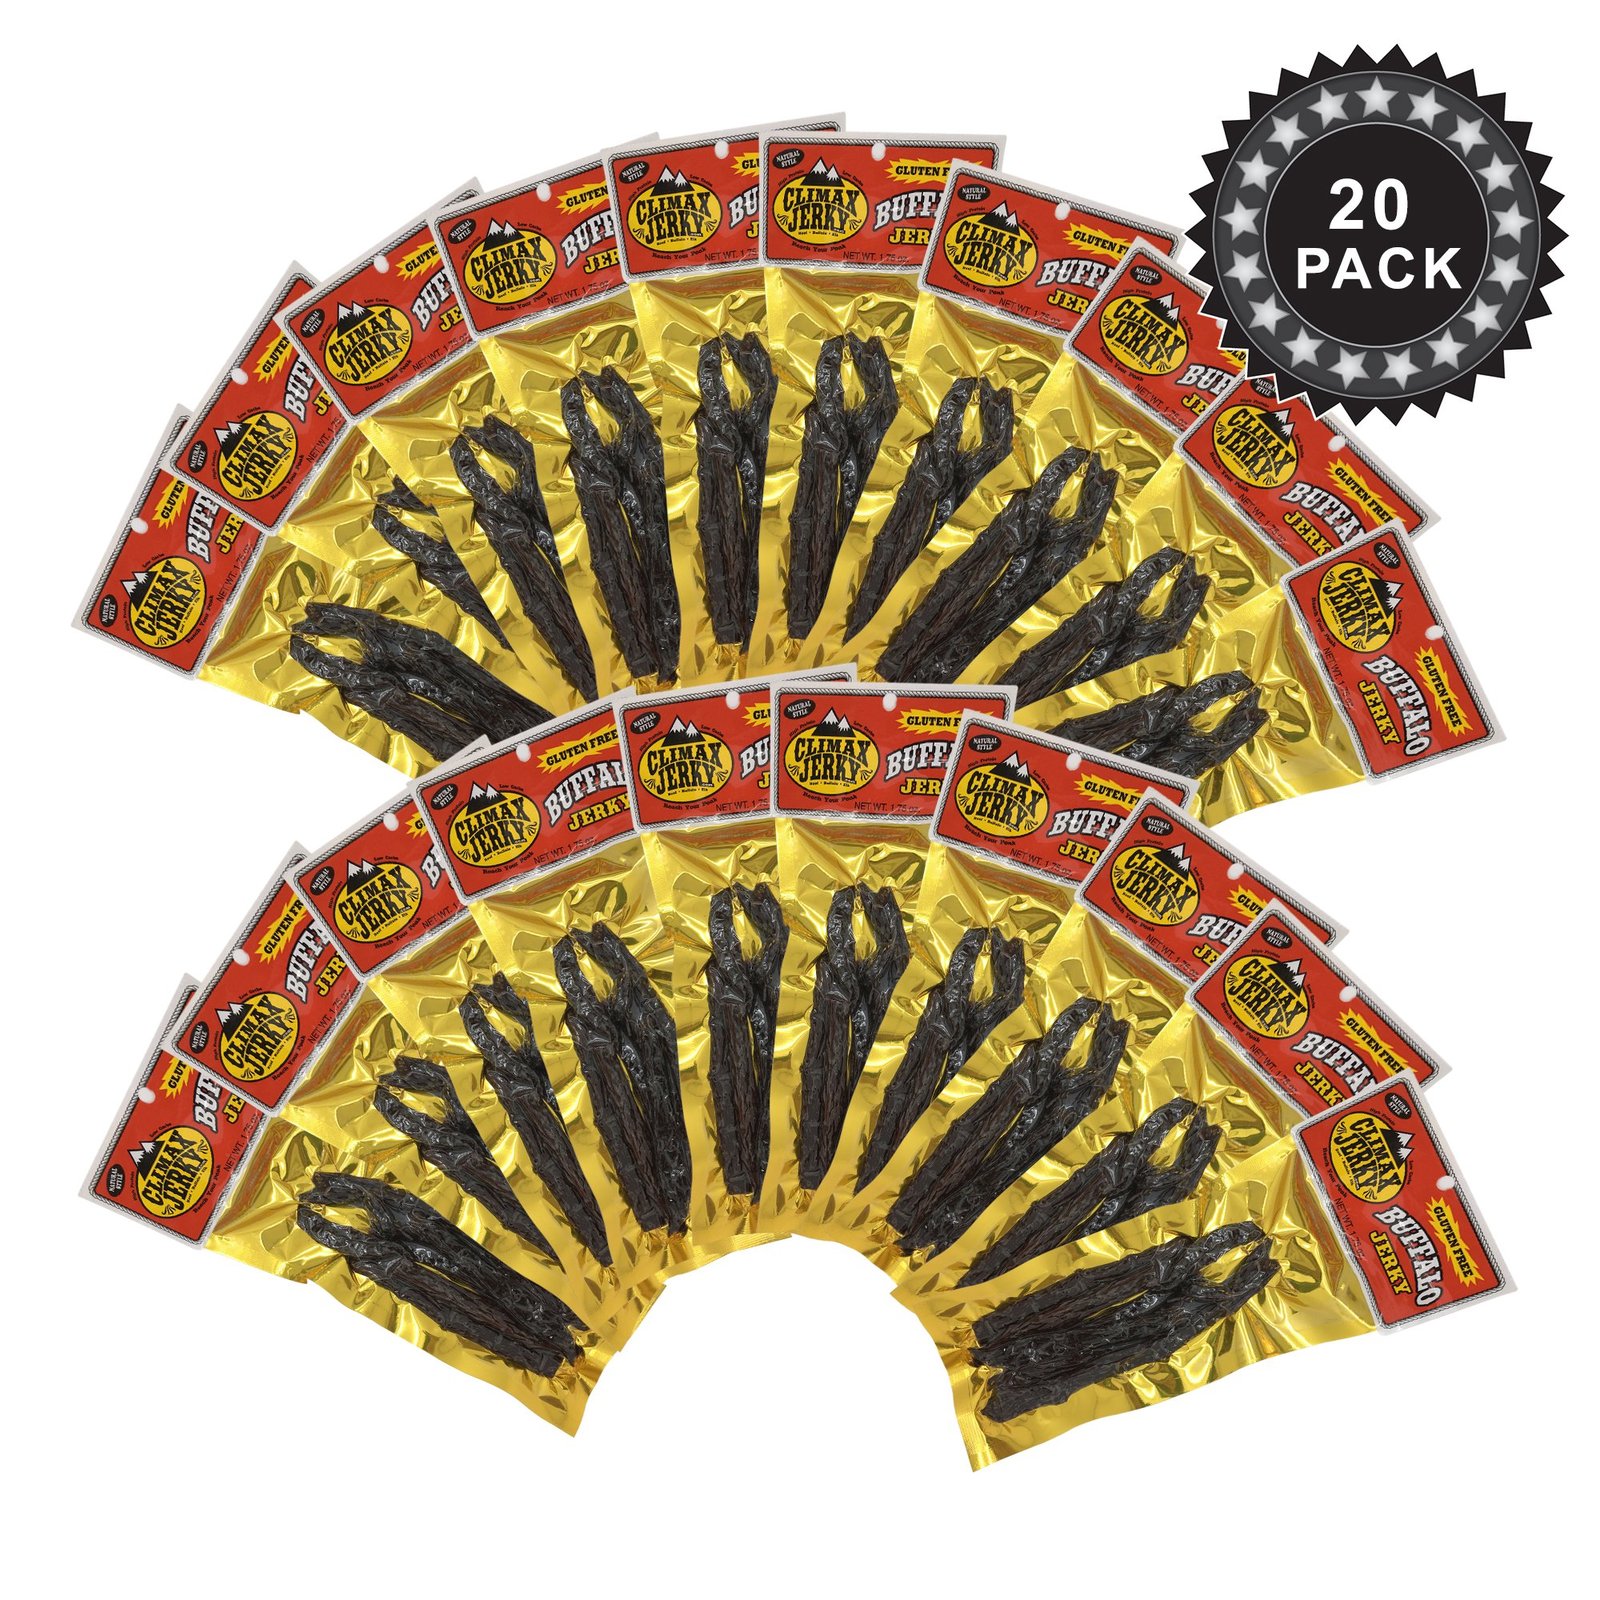 Primary image for BEST Premium Natural Style GLUTEN FREE Thick Strips 1.75 OZ. Buffalo Jerky - No 